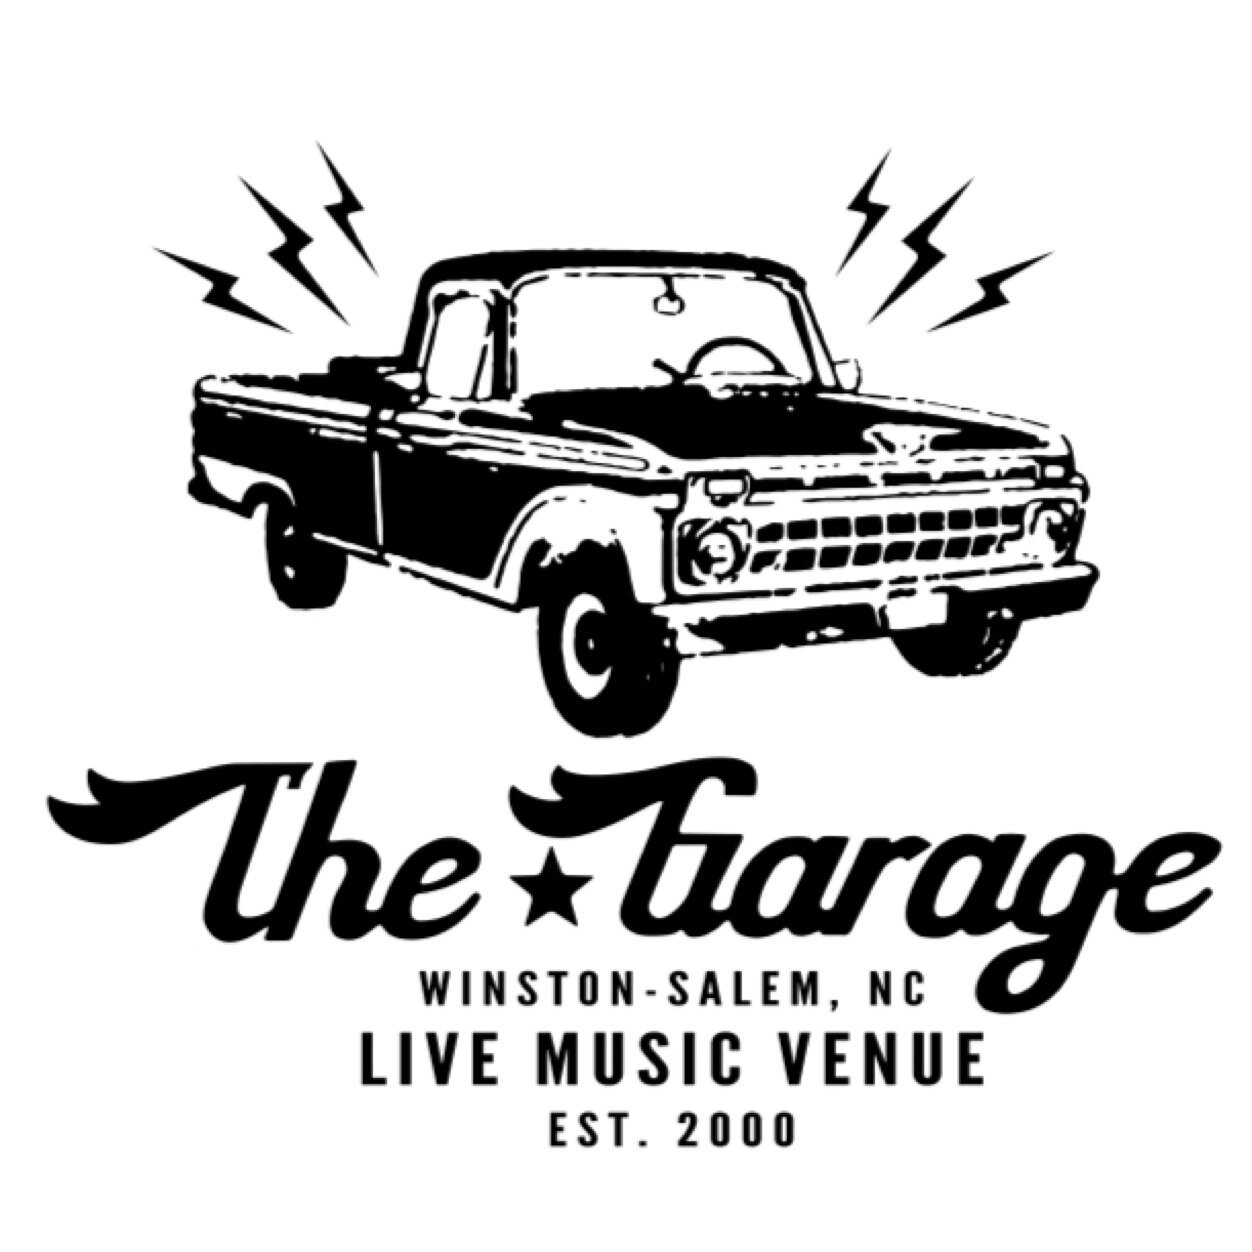 The Garage was the oldest and raddest music venue in Downtown Winston Salem. The Garage boasted the best local and national talent since 2000. In transition...